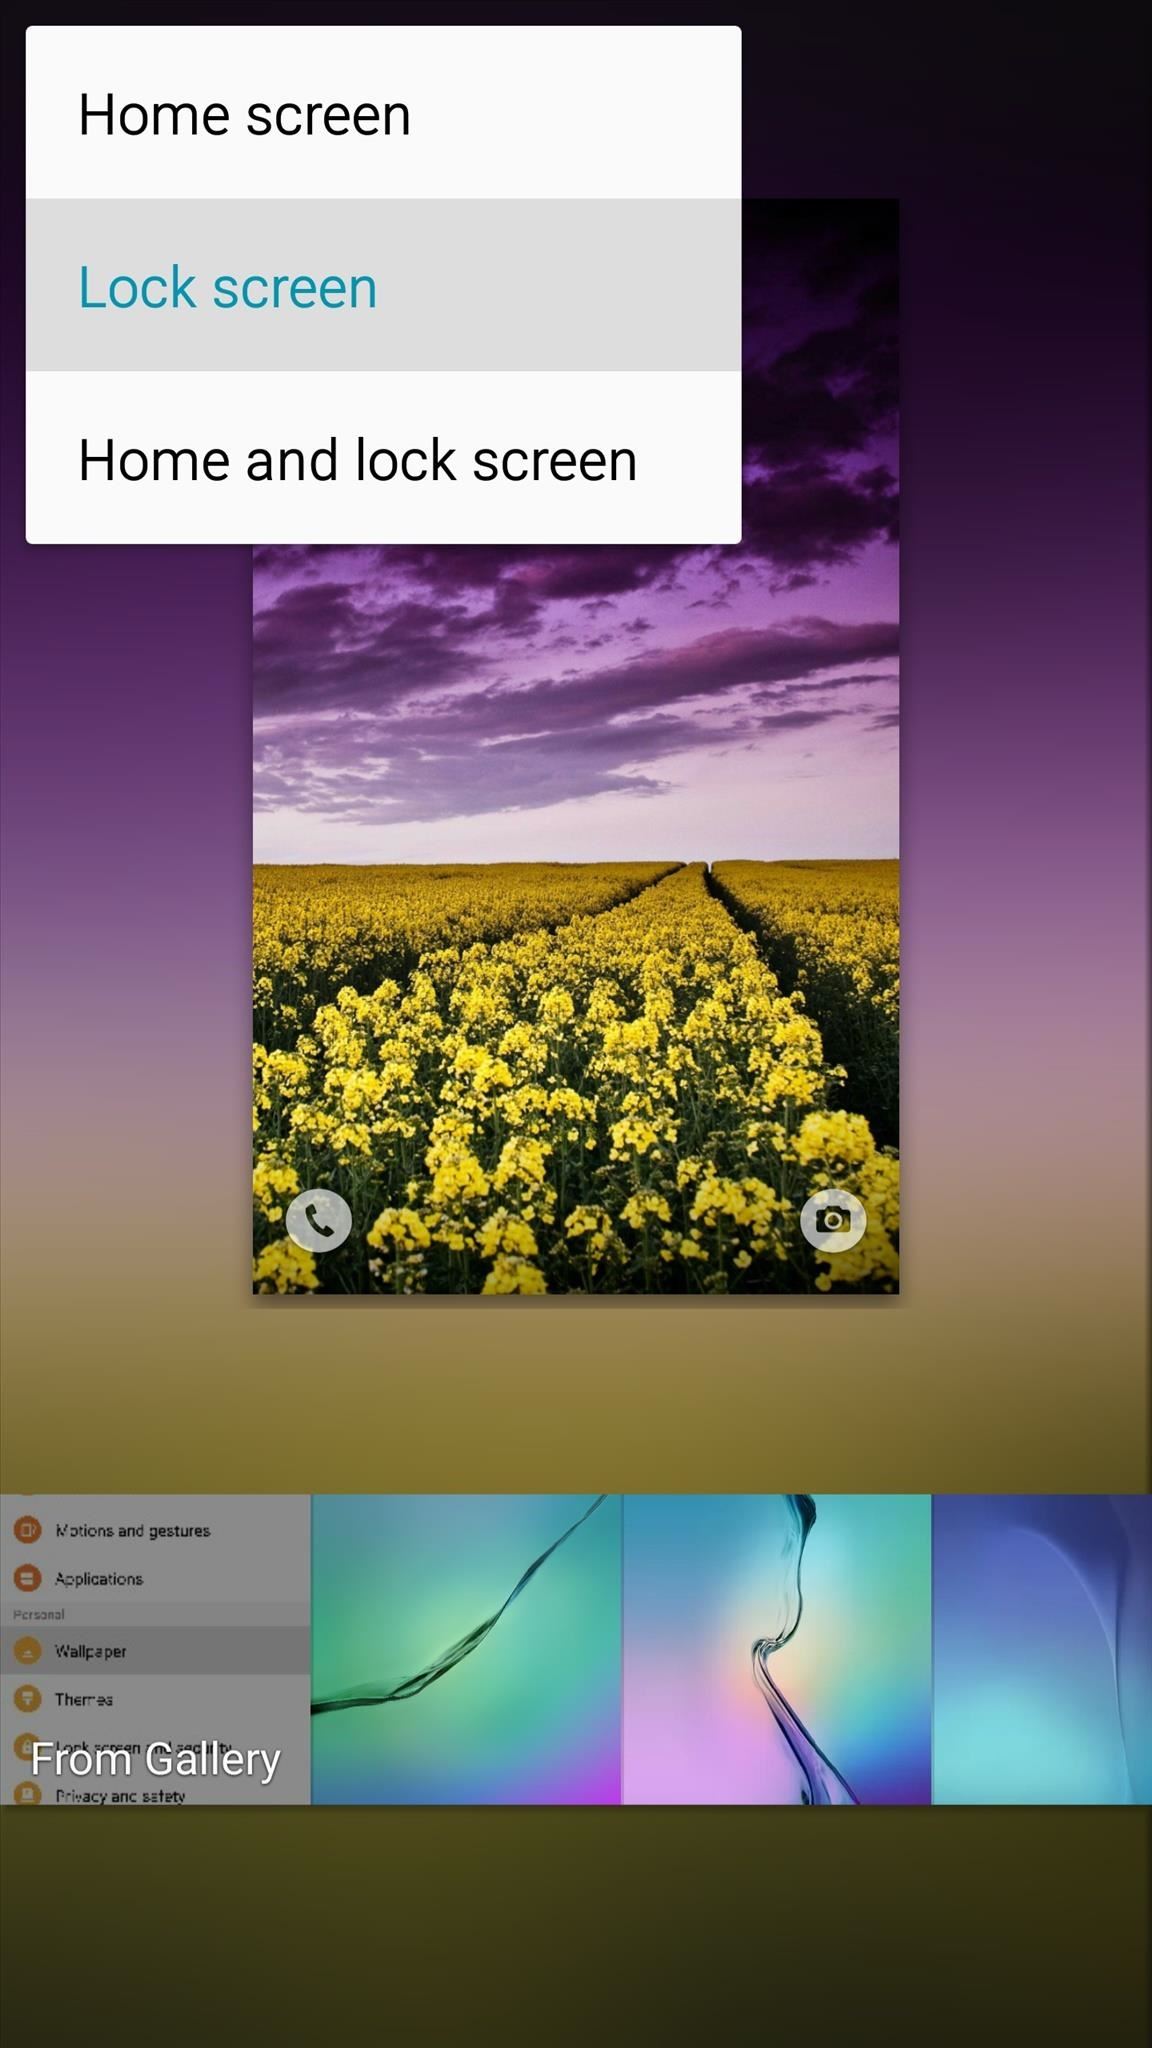 How To Set Rotating Lock Screen Wallpapers On Samsung Galaxy Devices Samsung Galaxy S6 Gadget Hacks